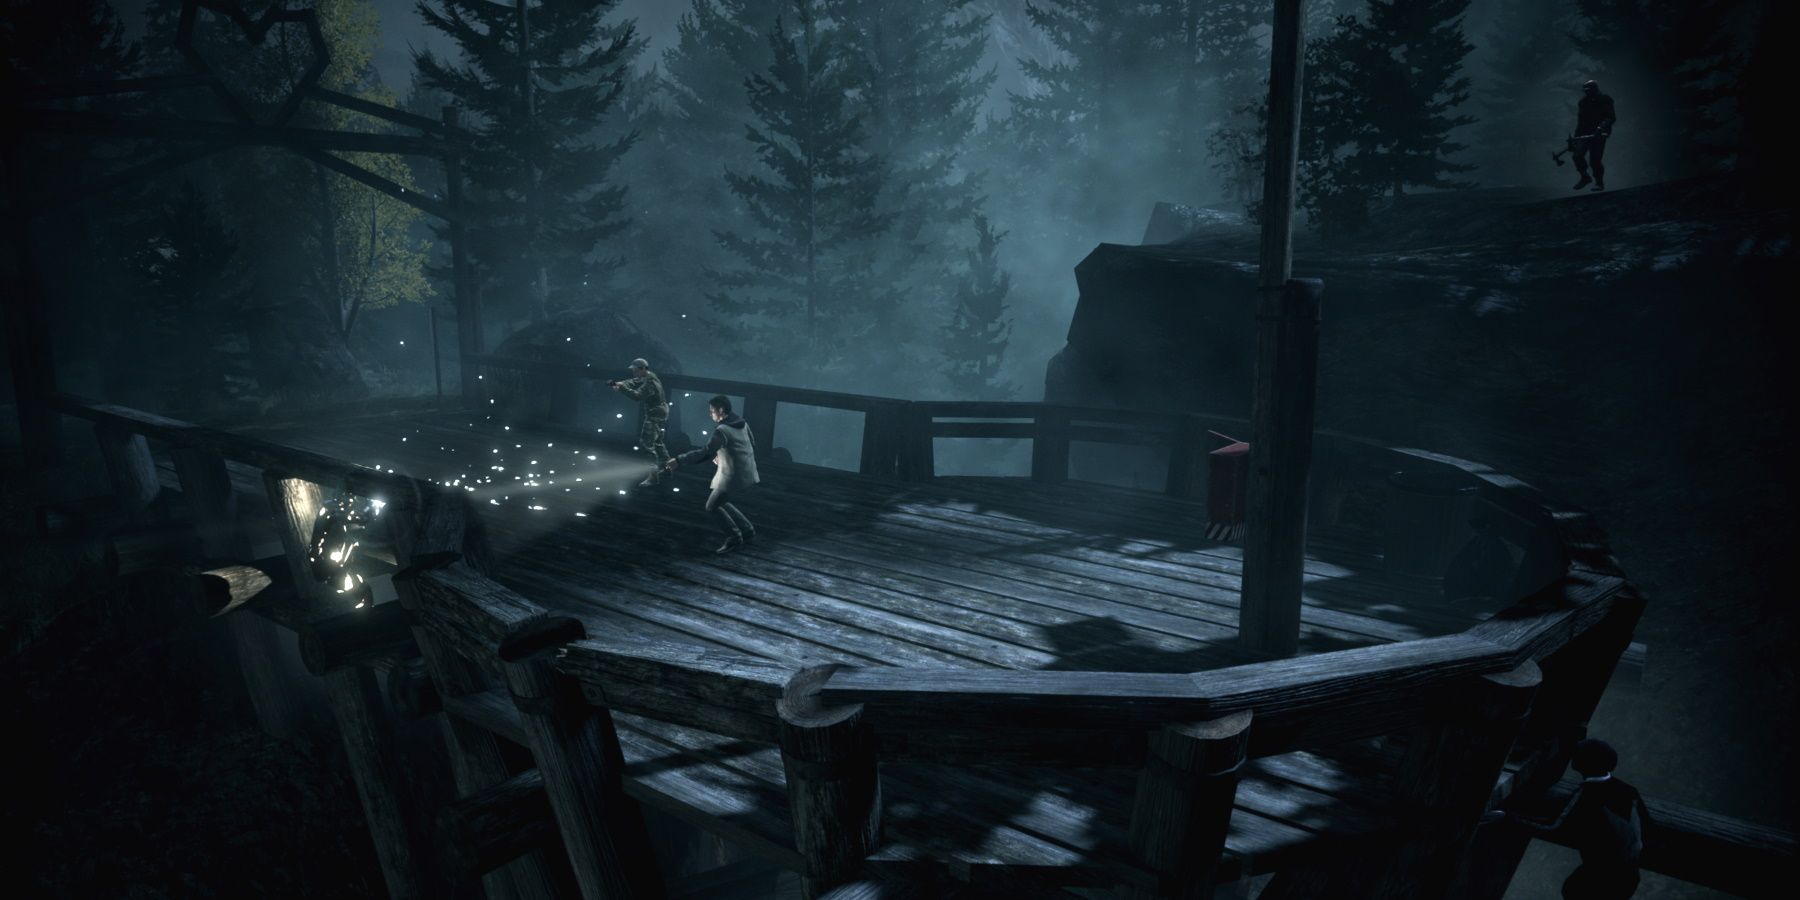 alan wake remastered holding back the taken with no weapons after reaching lovers peak